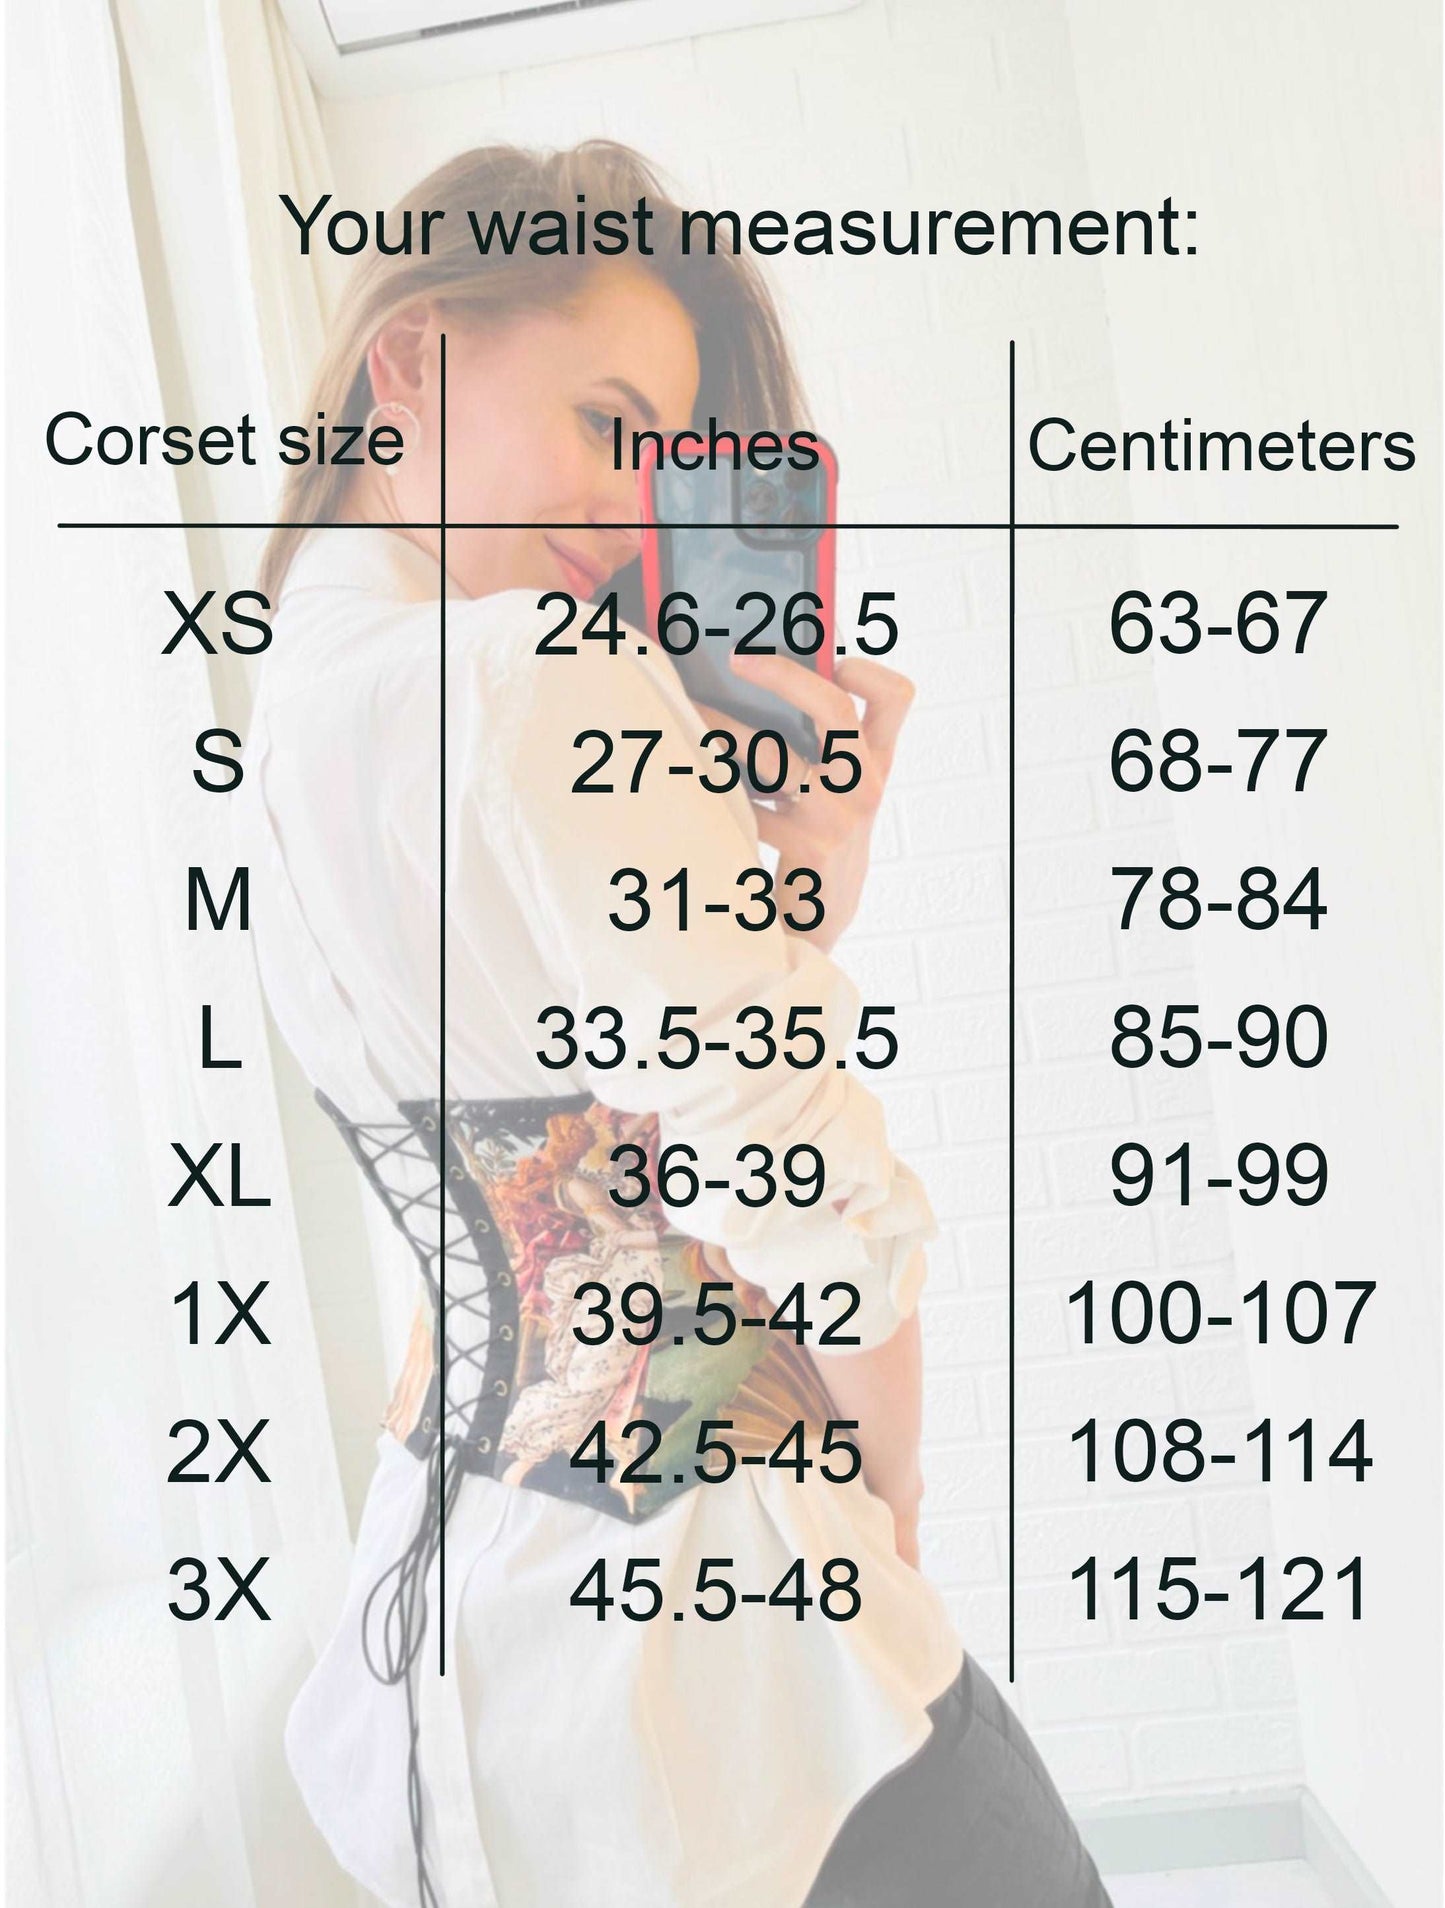 Size chart for your waist measurement and corset size